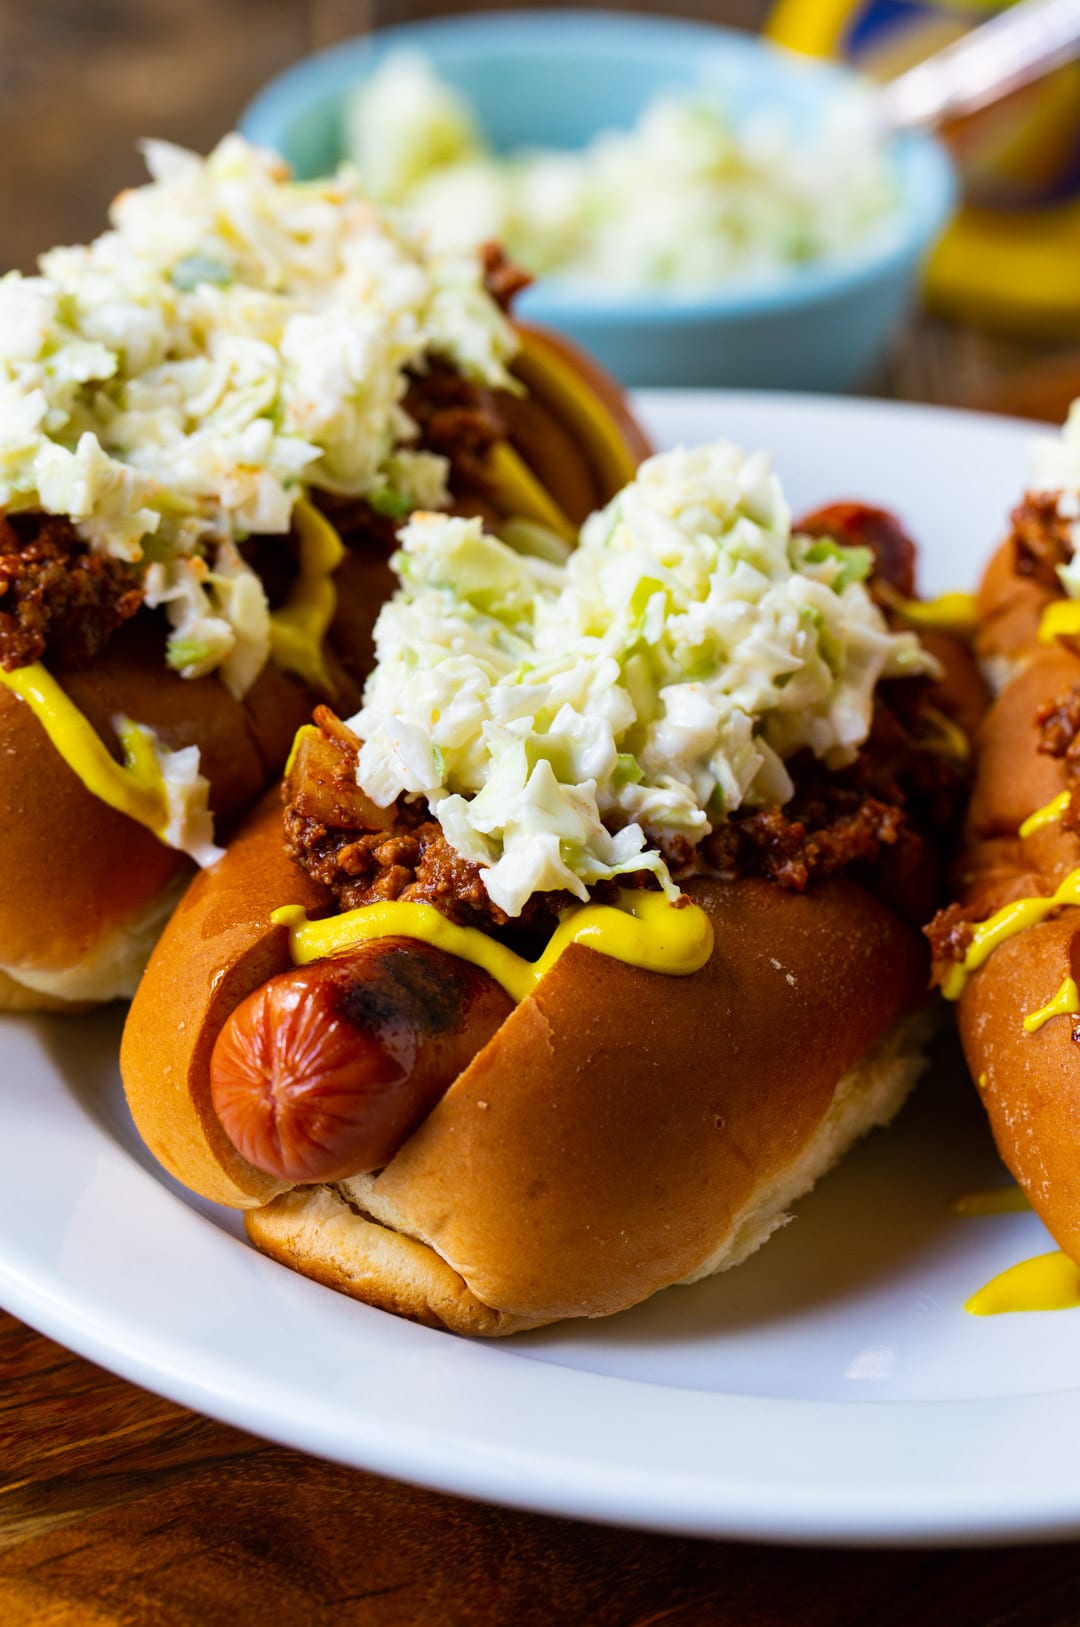 Three Chili Slaw Dogs on a plate.